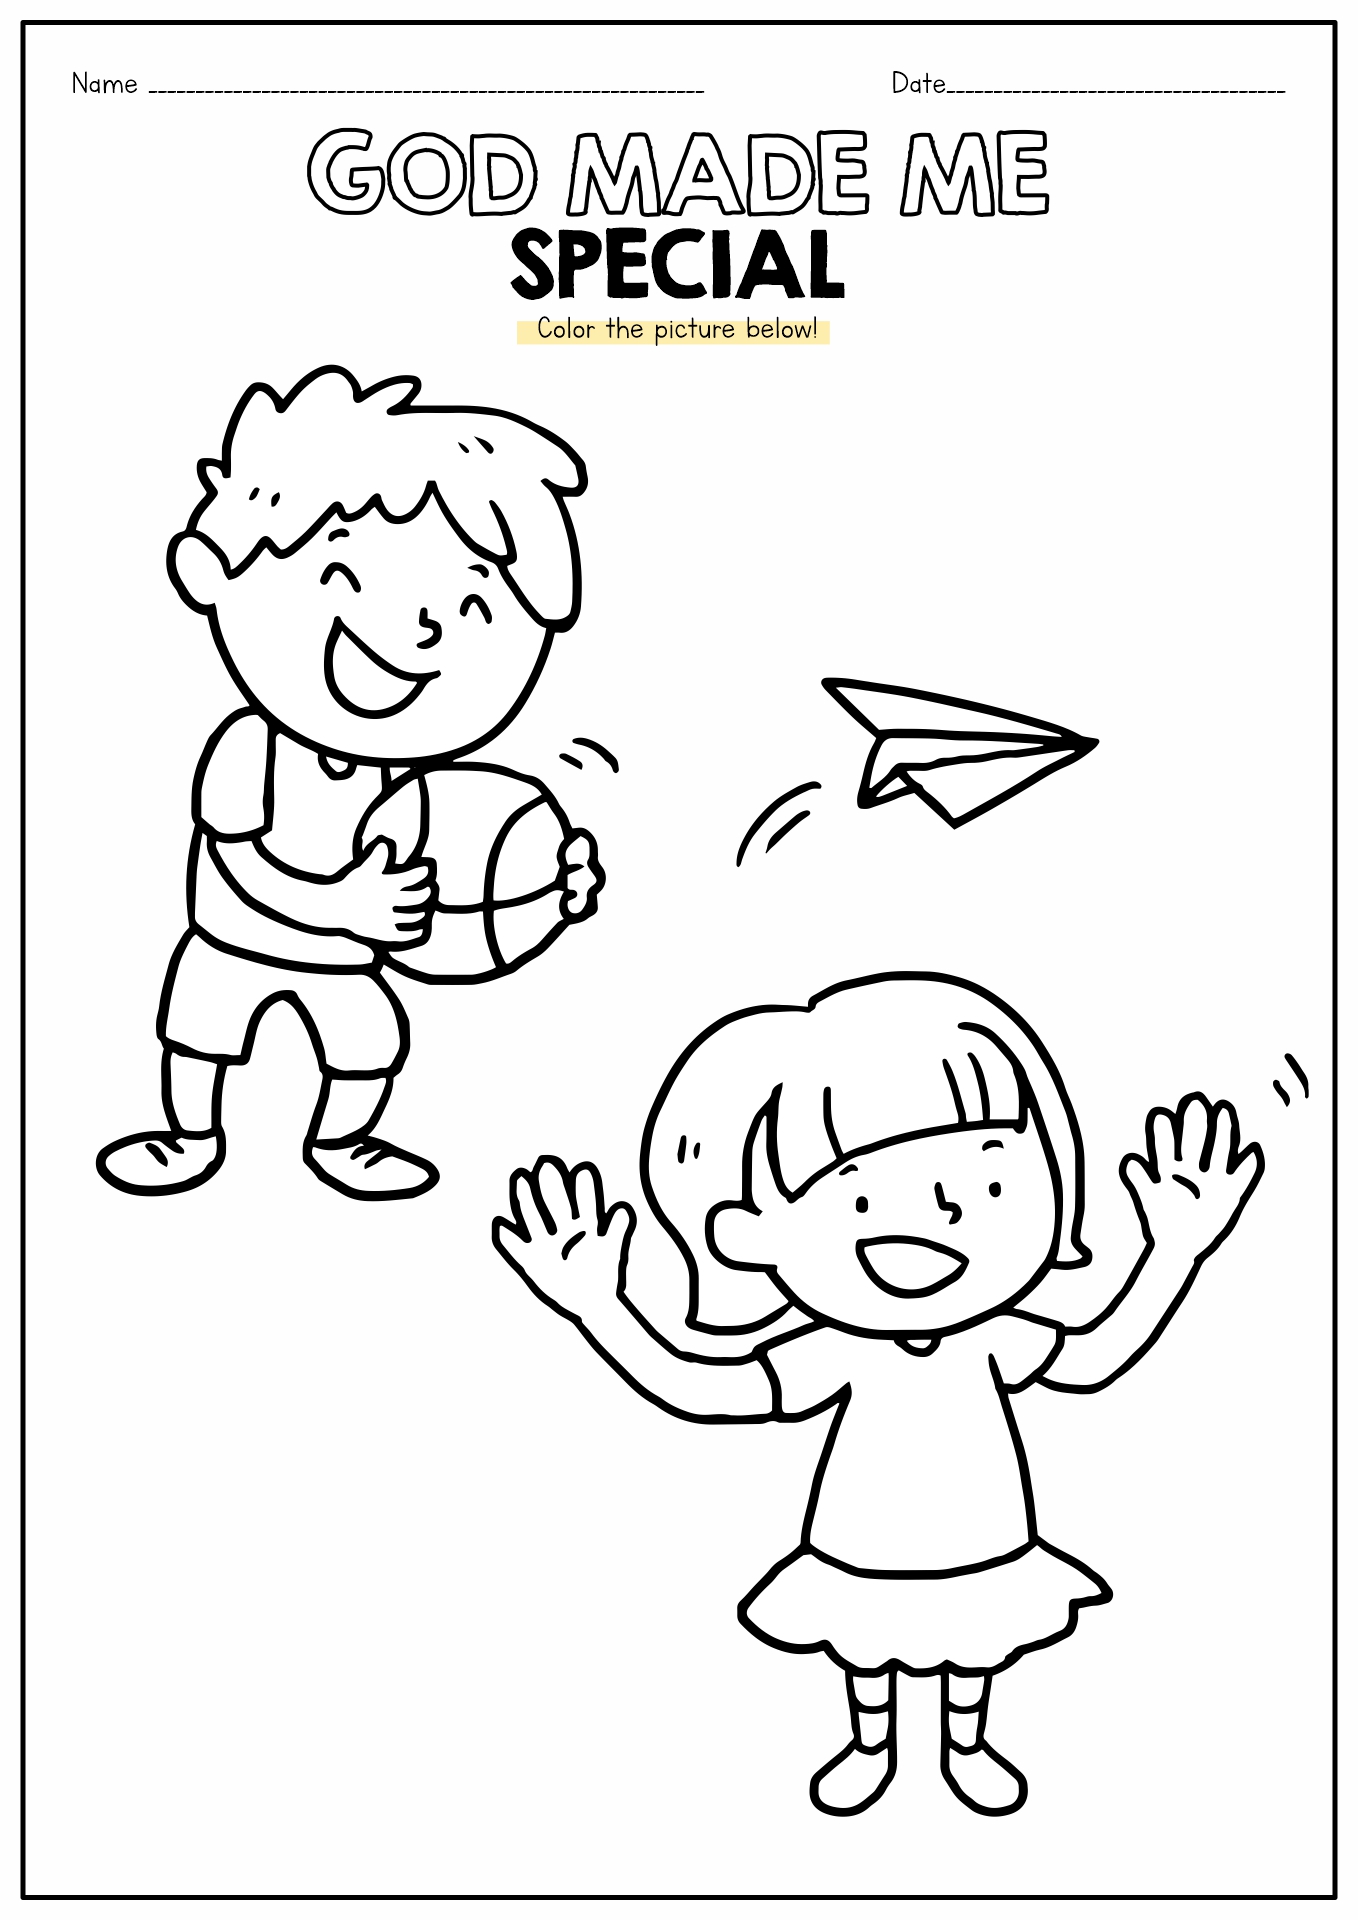 God Made Me Coloring Pages for Preschool Image